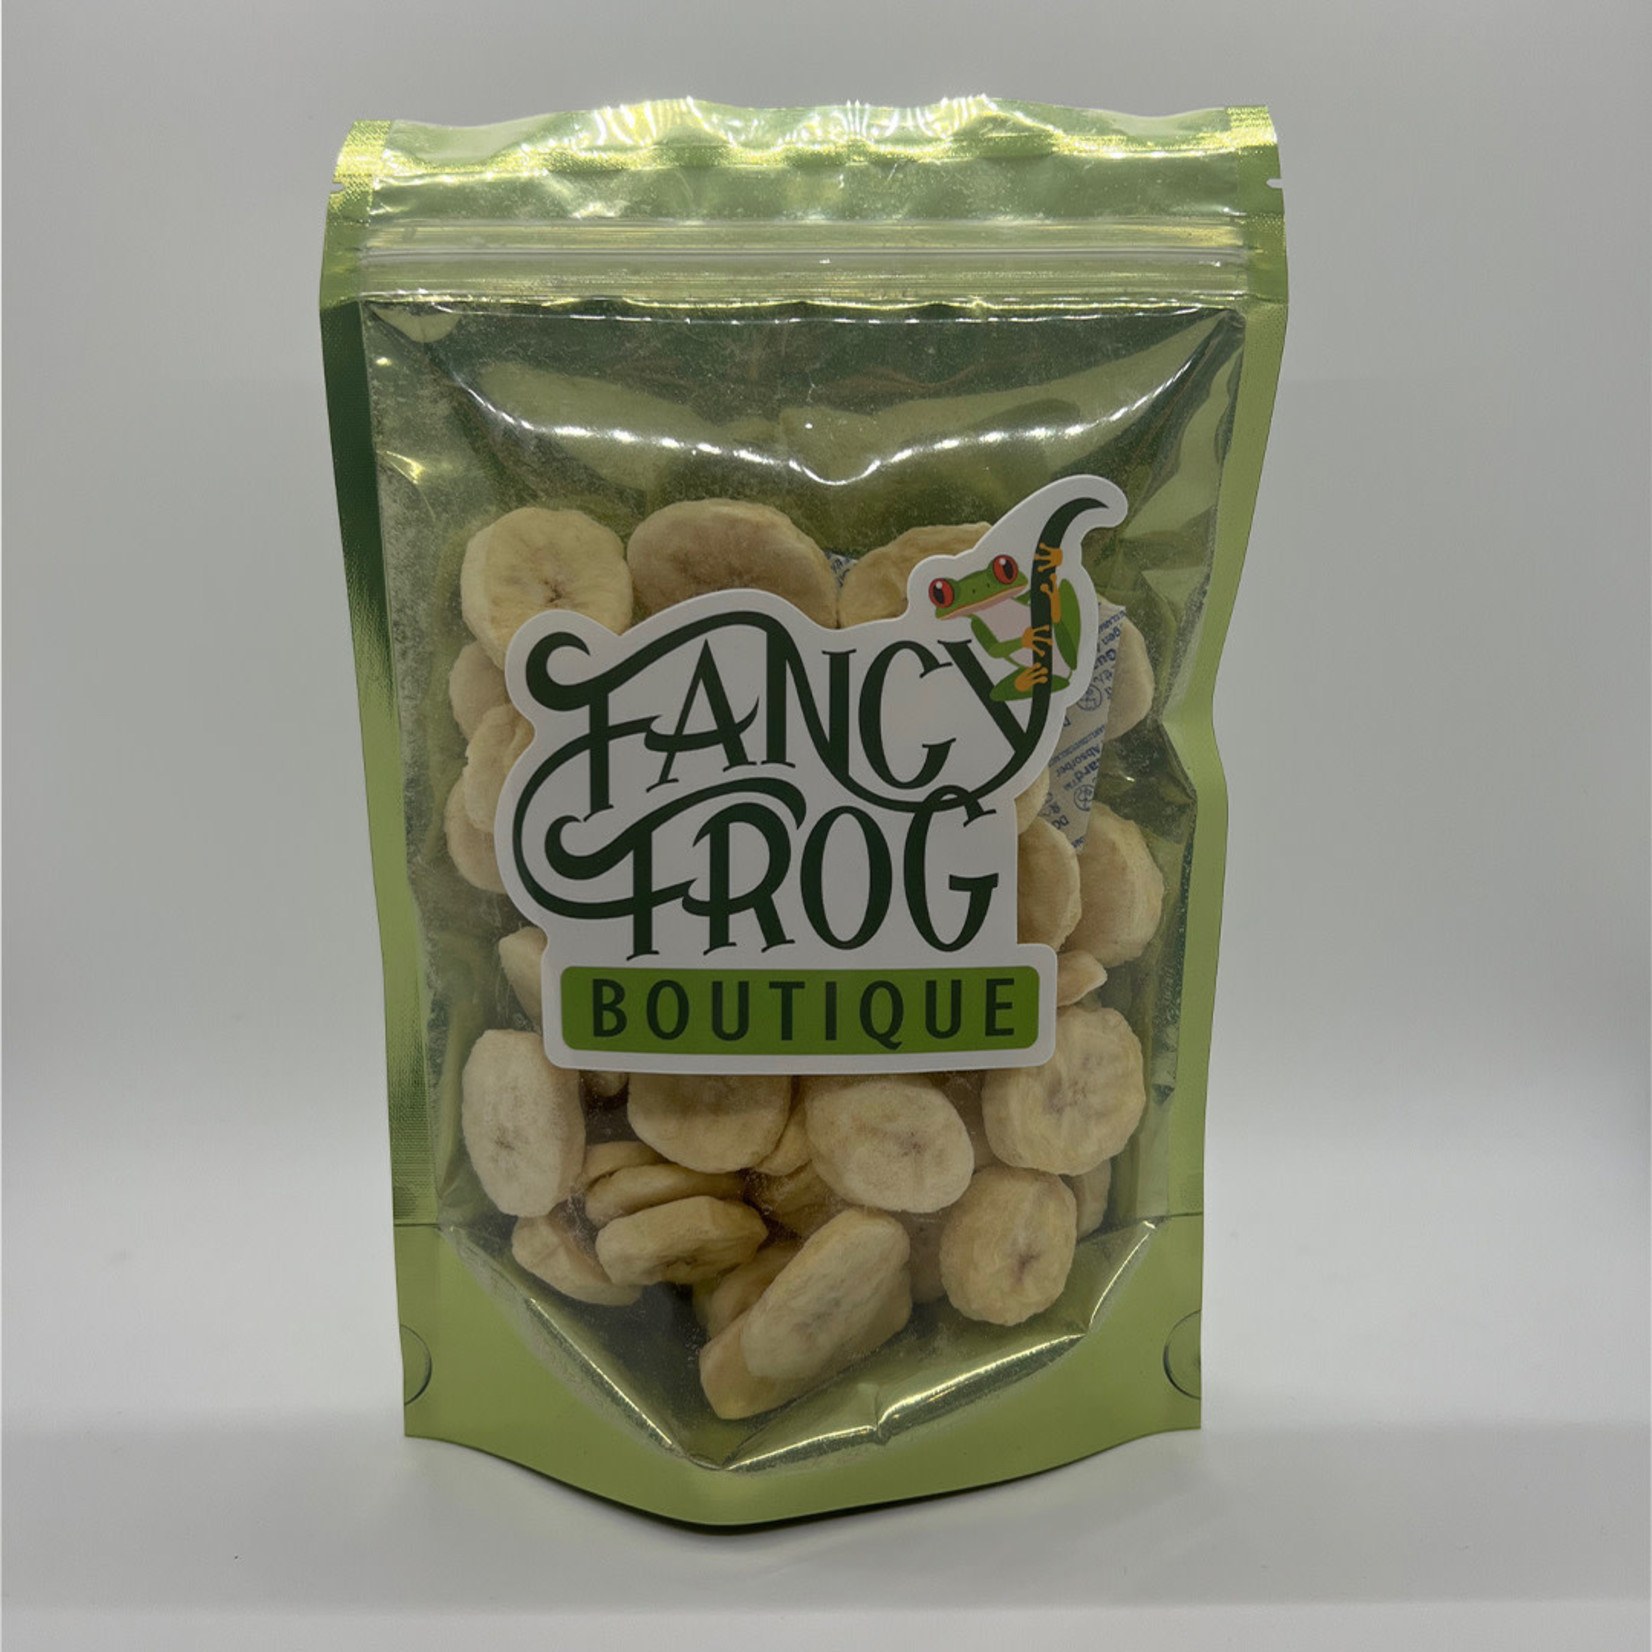 Fancy Frog Boutique Freeze Dried Bananas